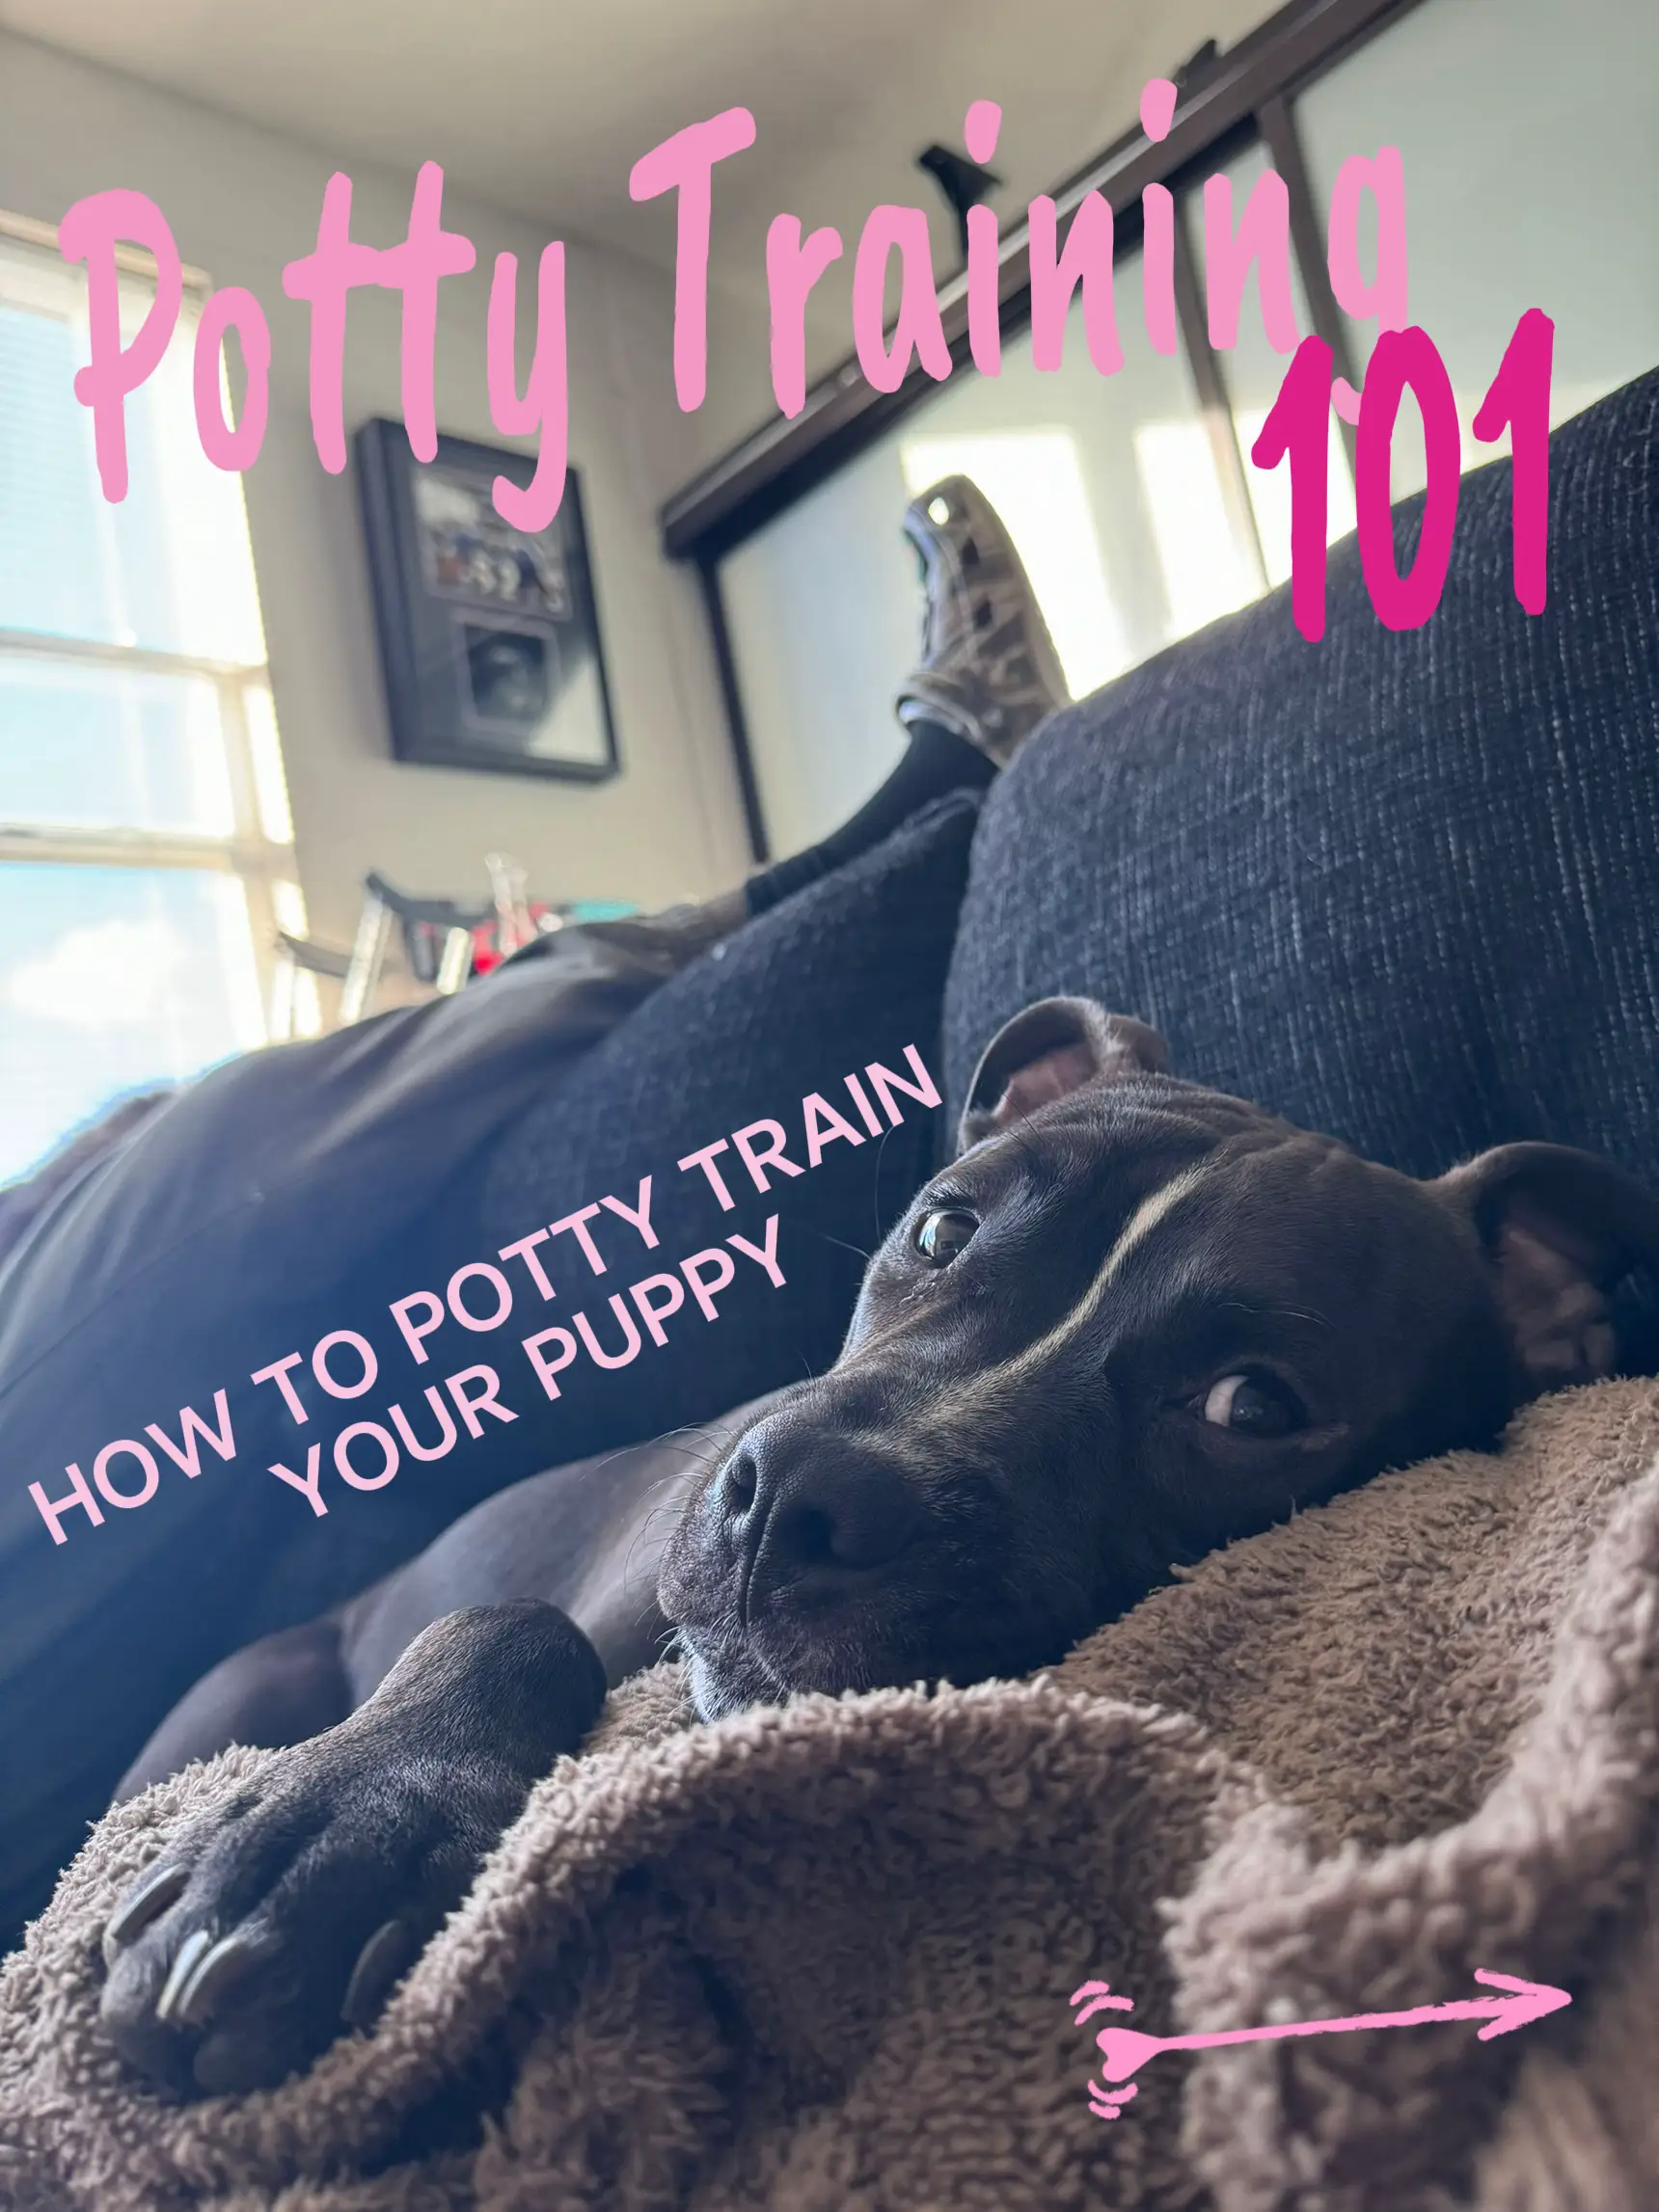 Training 9 Month Puppy to Potty - Lemon8 Search